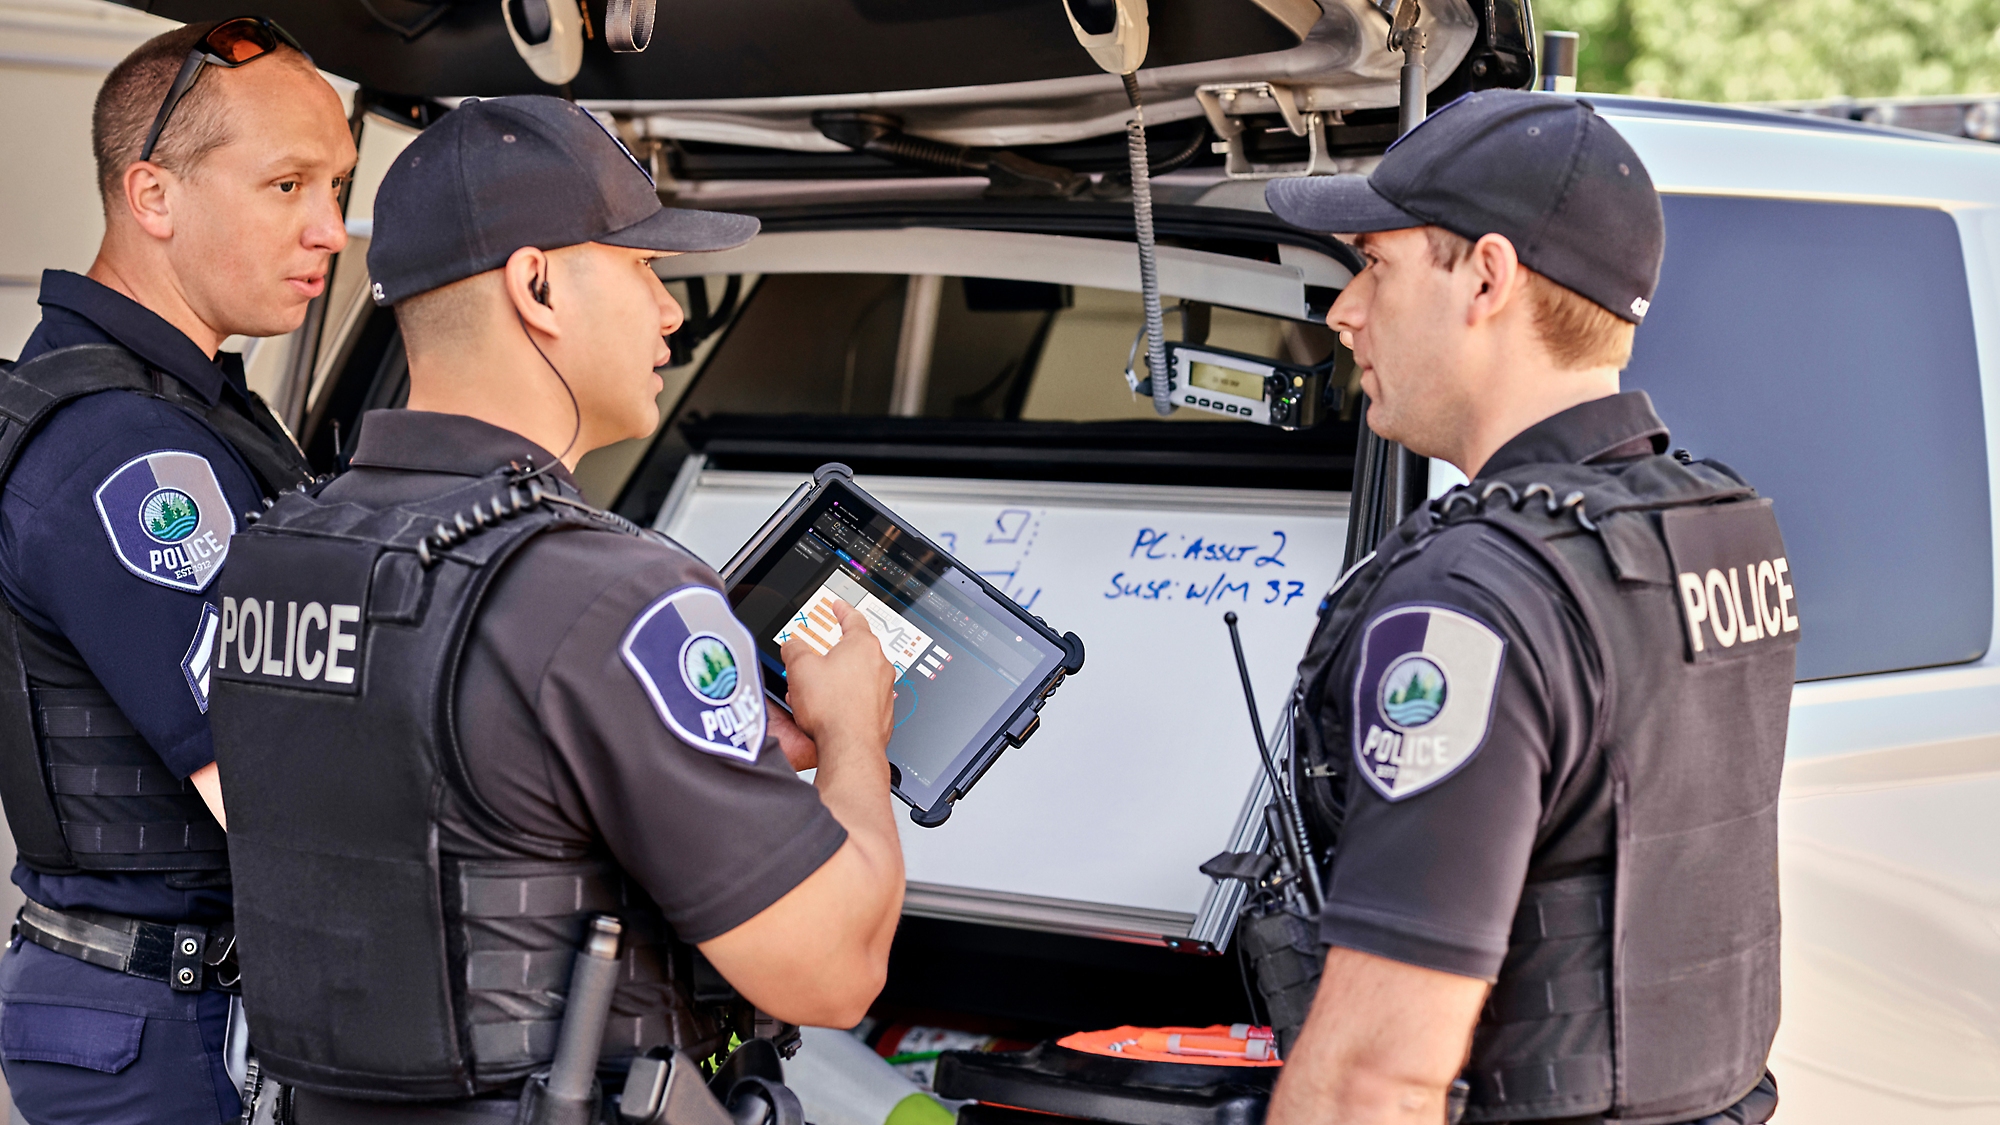 Three police officers review information on a digital tablet beside their patrol car with the trunk open